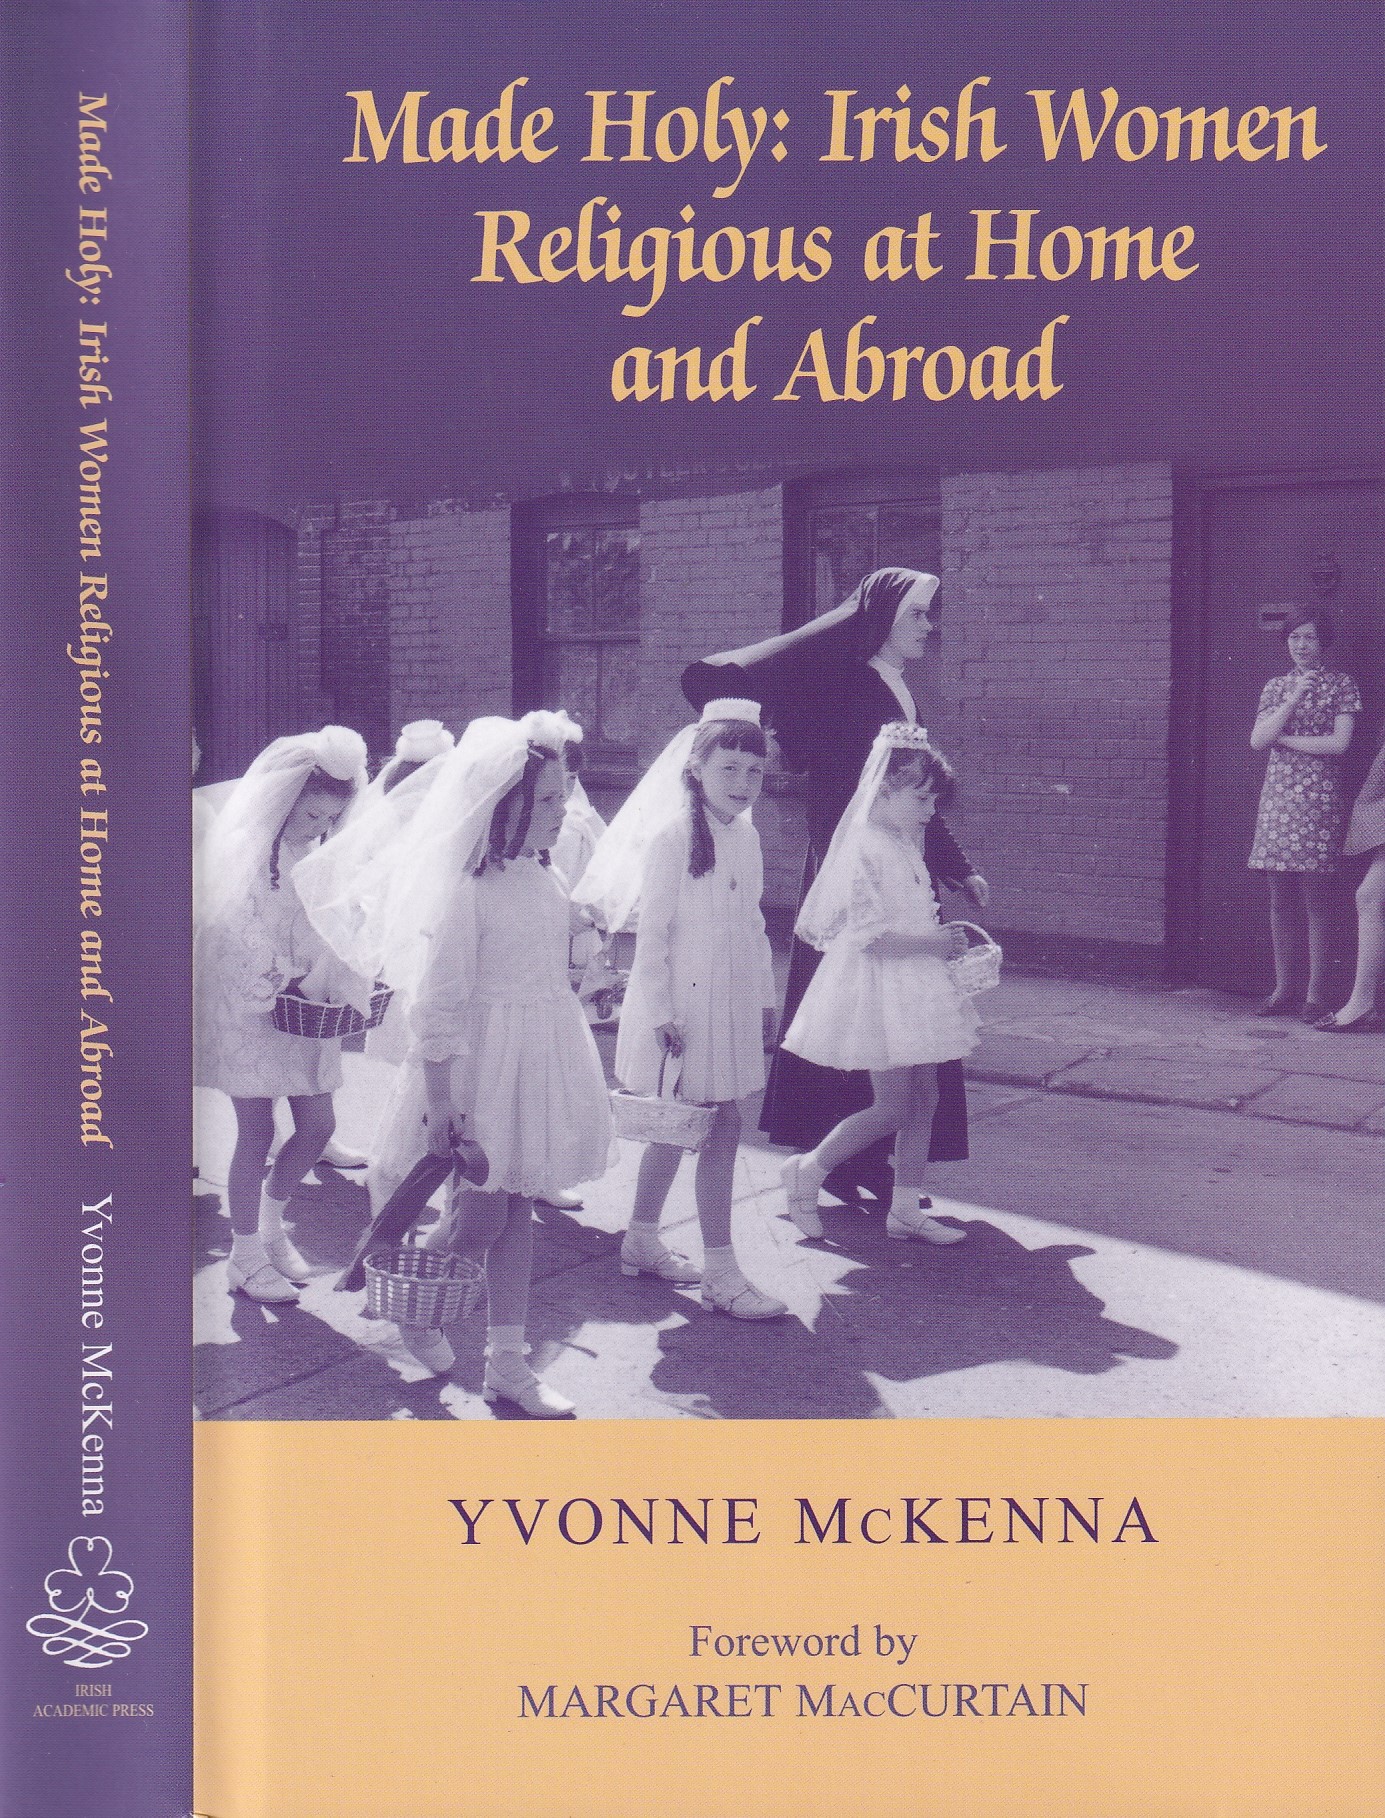 Made Holy: Irish Women Religious at Home and Abroad | Yvonne McKenna | Charlie Byrne's